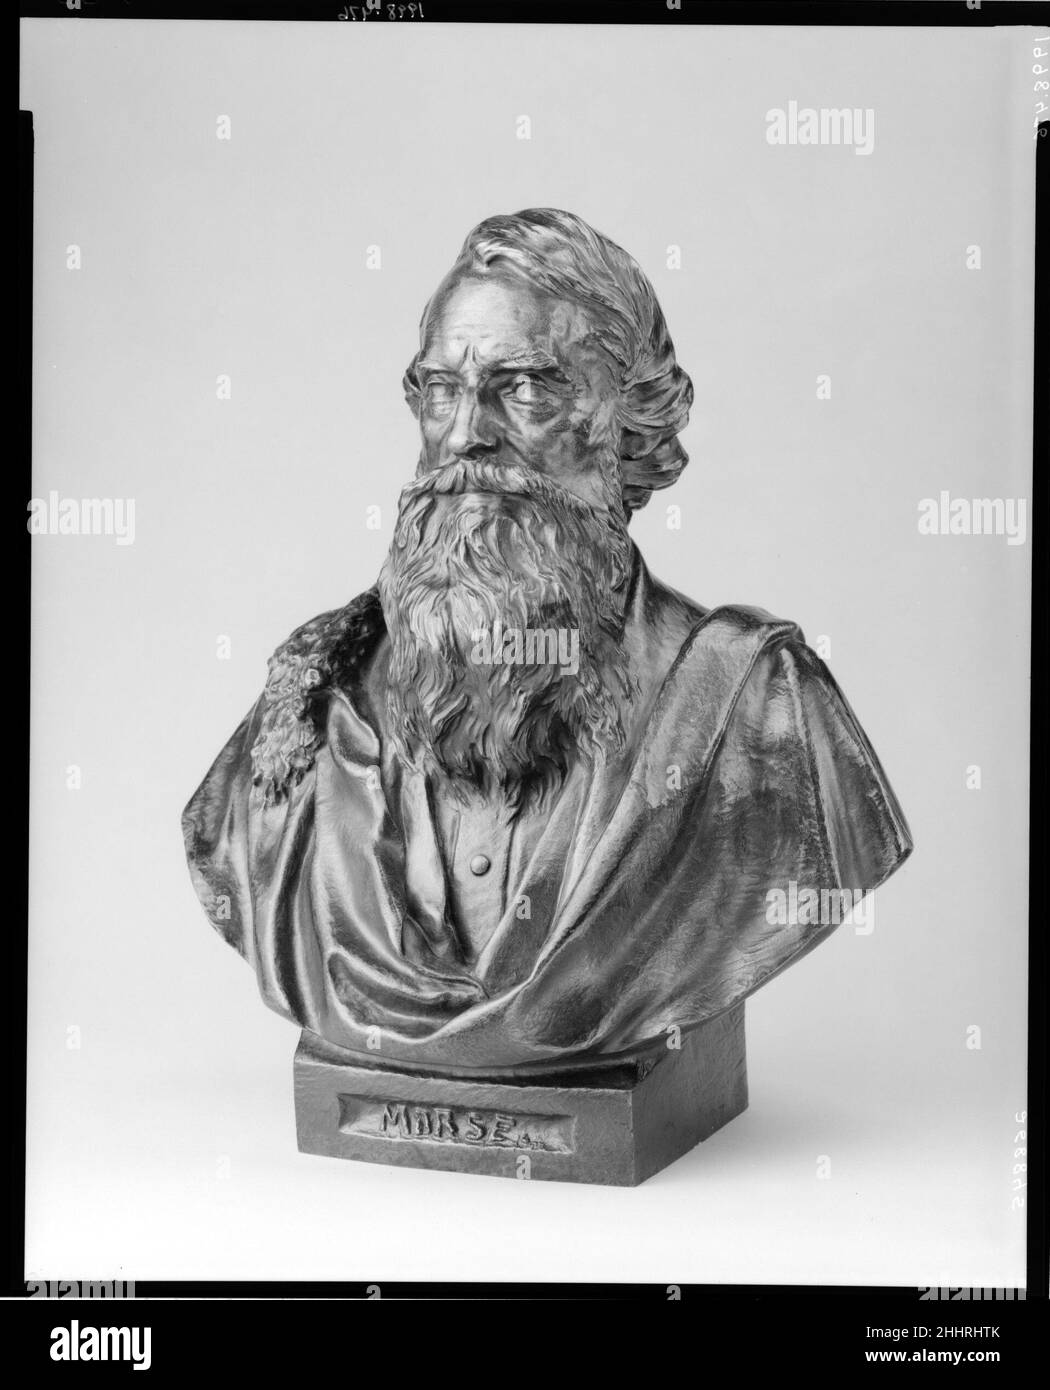 Samuel F. B. Morse ca. 1870 Byron M. Pickett American Pickett's bust-length portrait of Morse is related to his over-lifesize bronze statue of the artist-inventor, dedicated in 1871 in Central Park. The elderly bearded Morse is portrayed in contemporary dress with cloaked shoulders. His drape and unincised pupils are typical neoclassical portrait devices that persisted well into the nineteenth century. This blend of realism and classicism exemplifies the portrait style favored by such other New York-based sculptors as Henry Kirke Brown, John Quincy Adams Ward, William O'Donovan, and Launt Thom Stock Photo